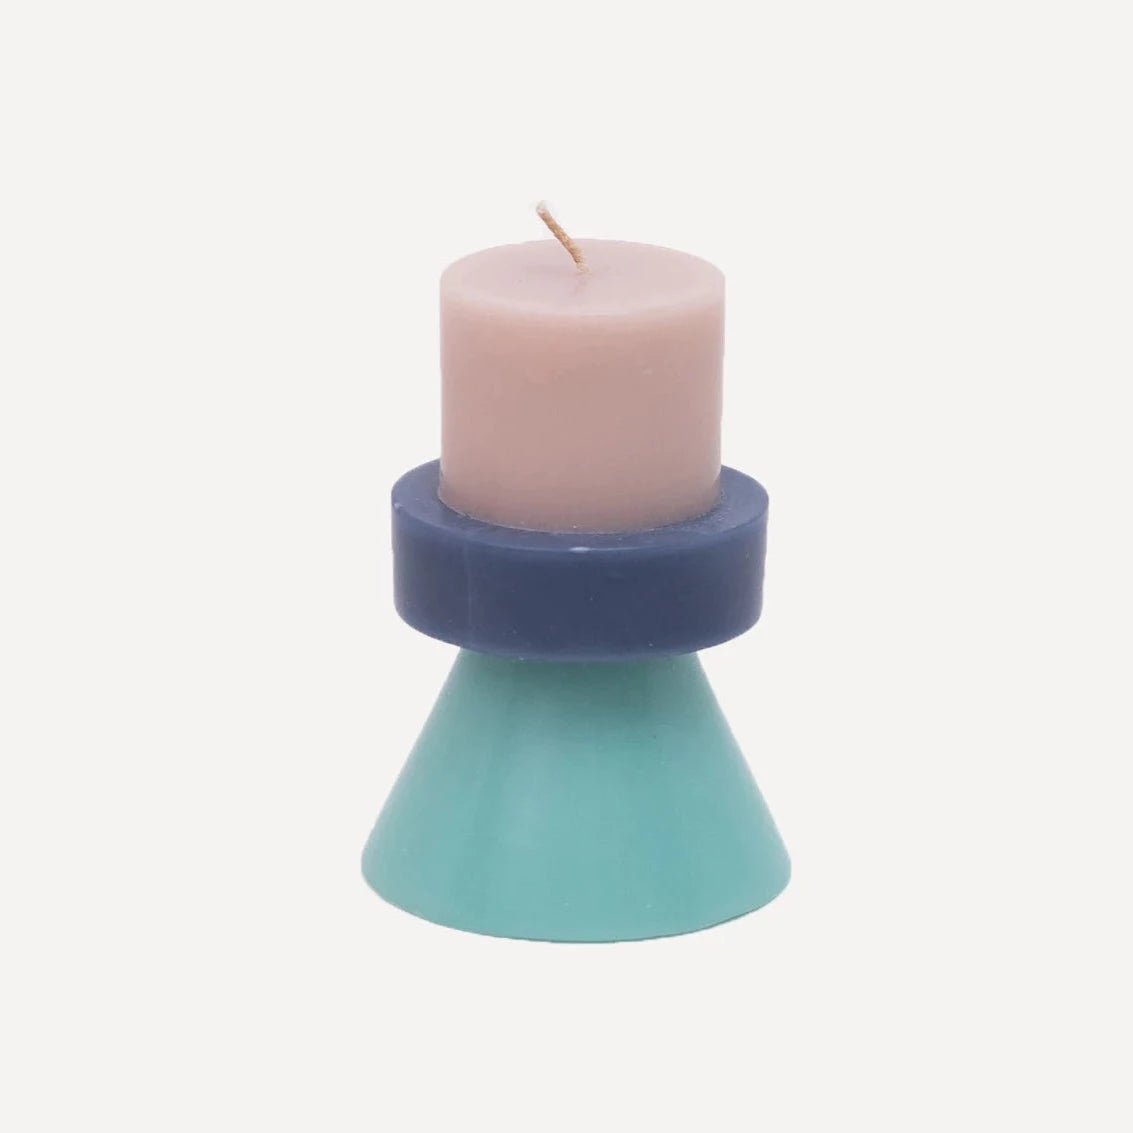 YOD AND CO - Stack Candle Mini - Nude, Pudderblå & Lys turkis - COLORPOP